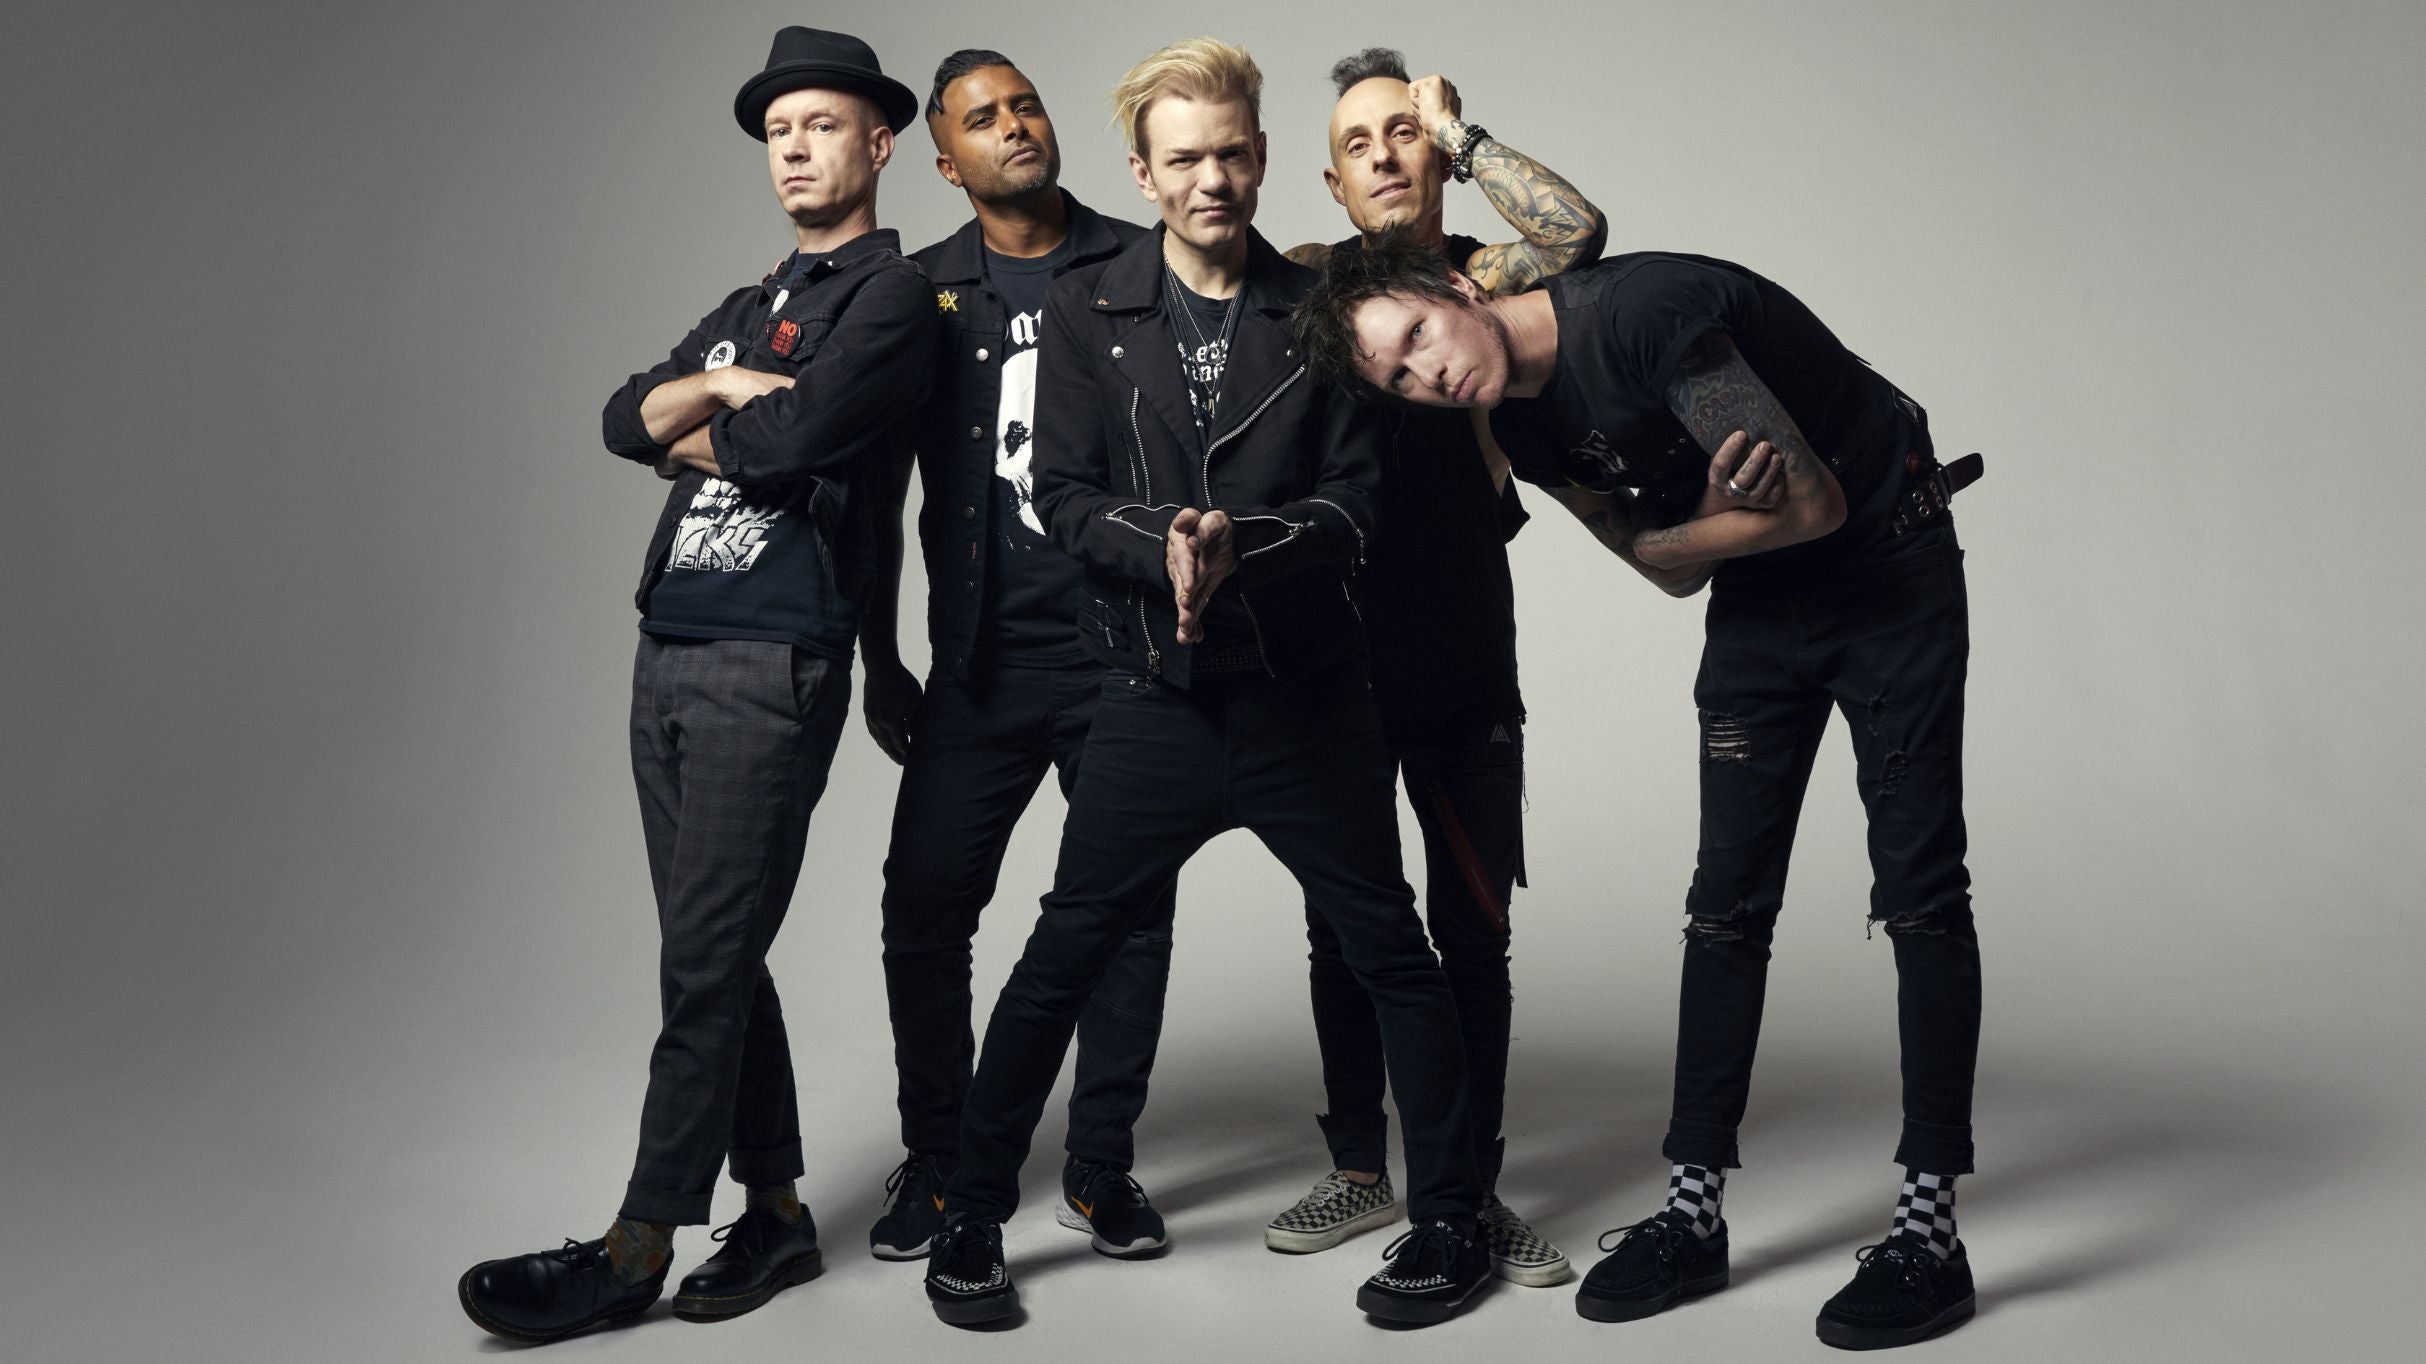 Sum 41: Tour of the Setting Sum presale password for approved tickets in Cedar Park